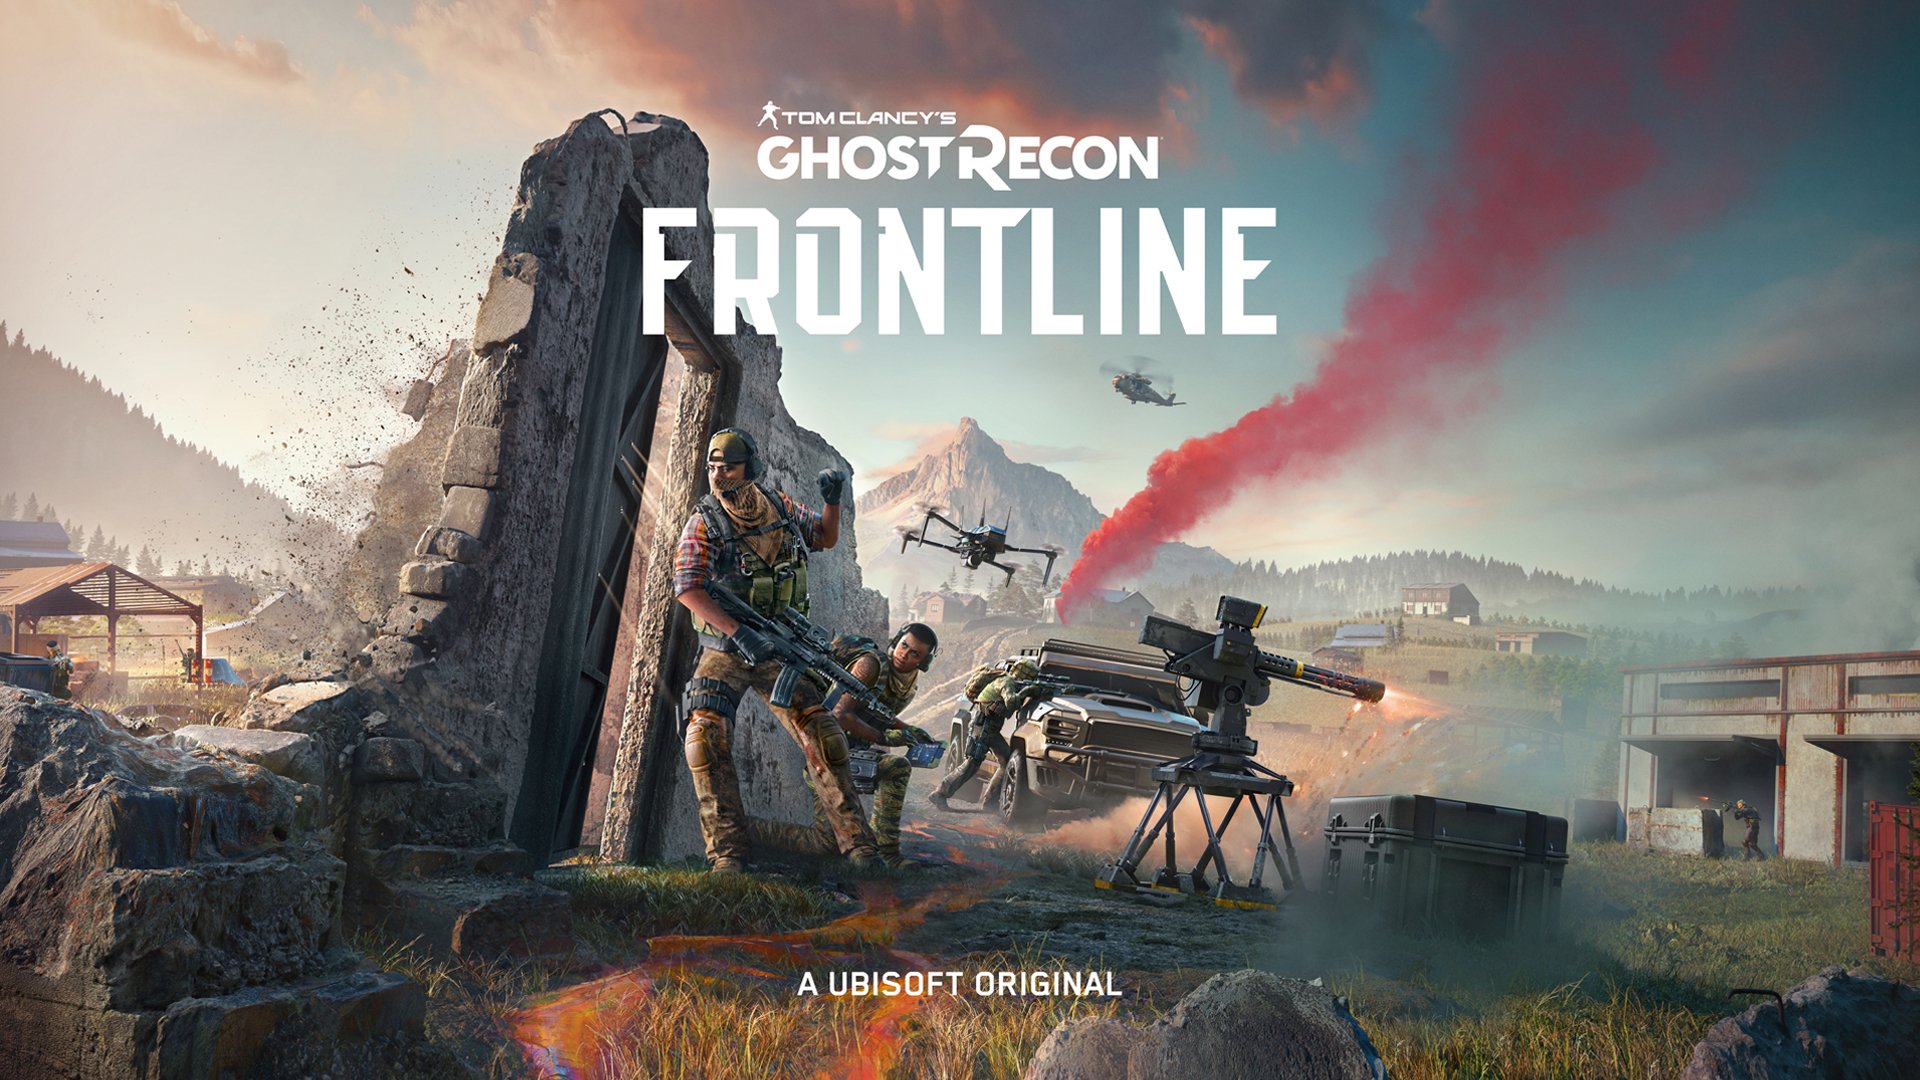 Free-to-play battle royale Tom Clancy’s Ghost Recon Frontline announced for PS5, Xbox Series, PS4, Xbox One, PC, and Stadia 